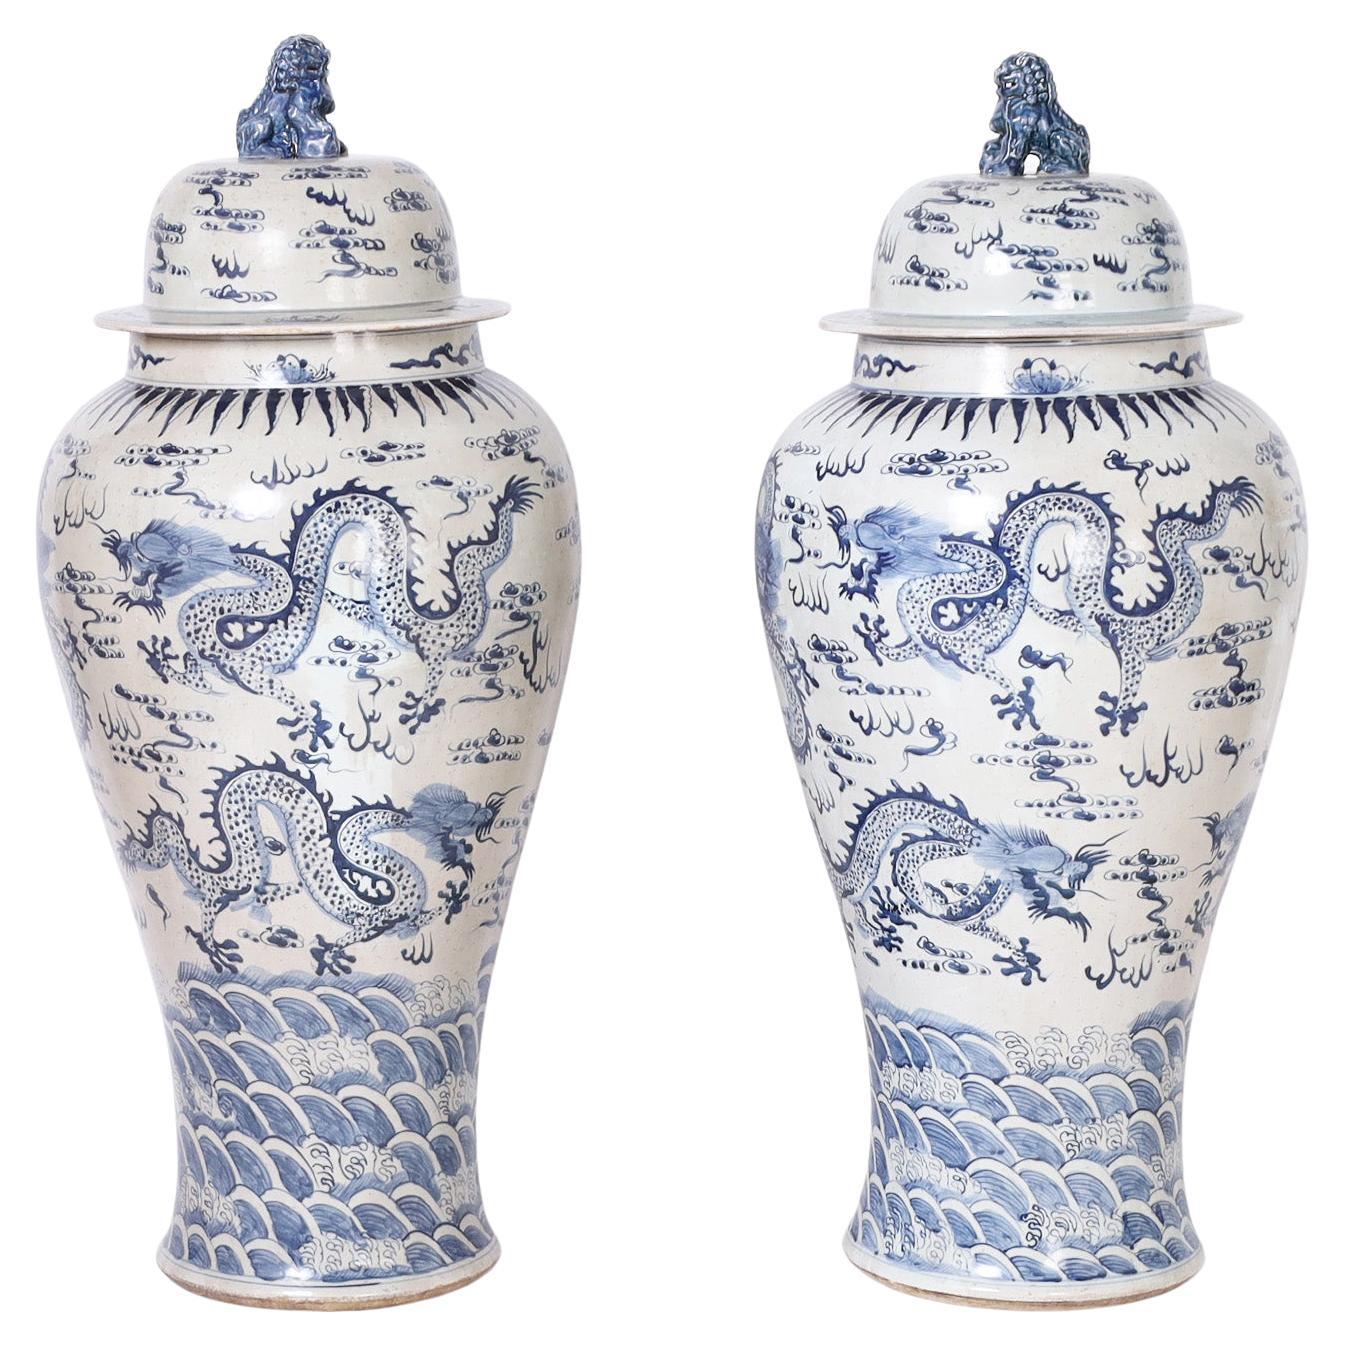 Pair of Blue and White Lidded Palace Urns with Dragons